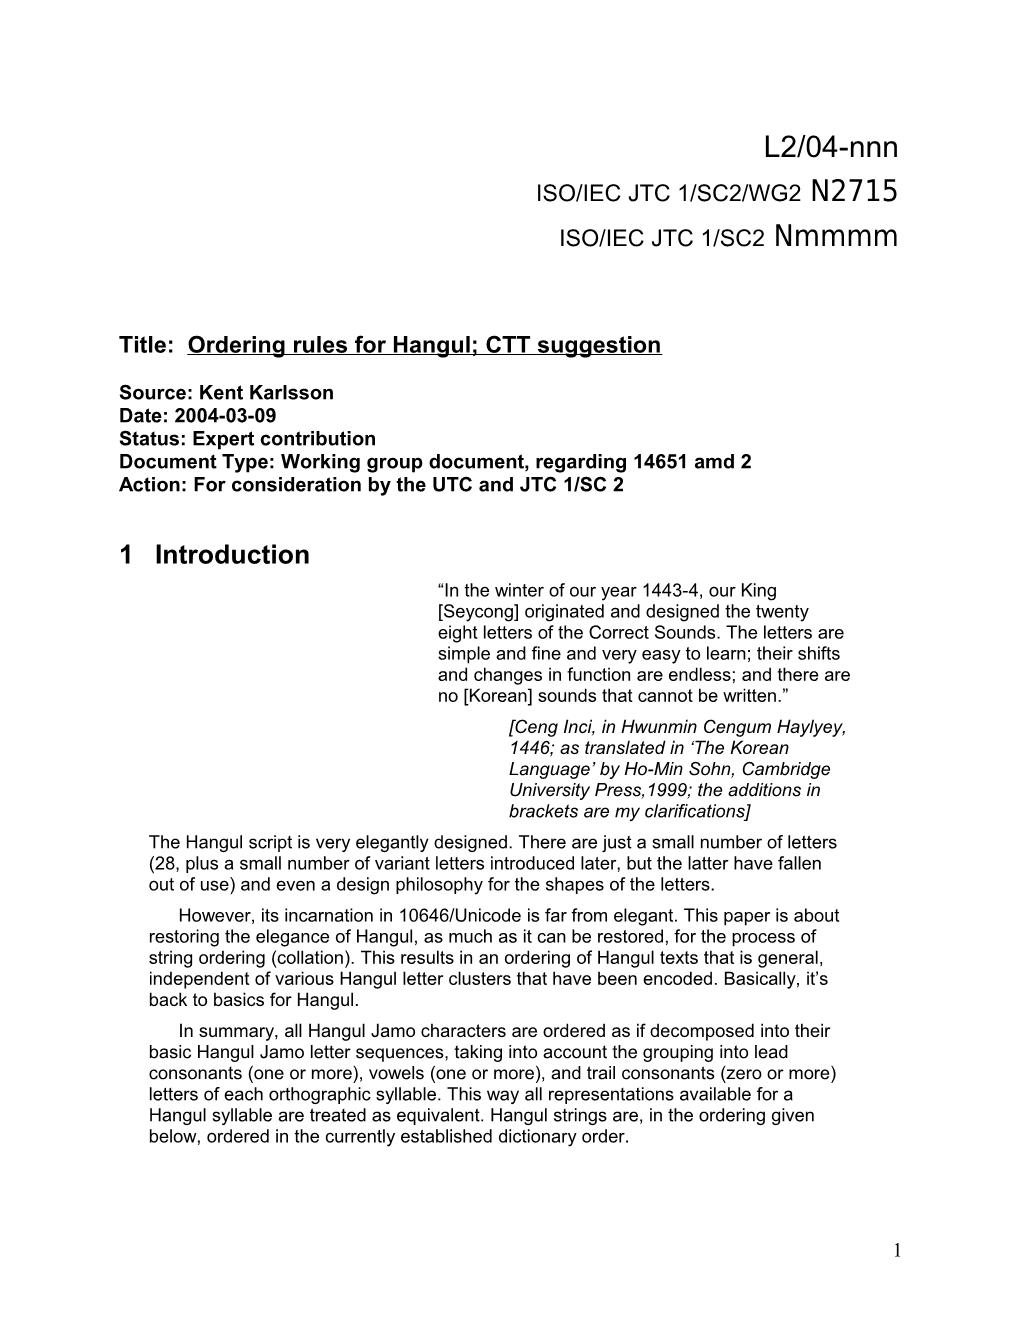 Suggestions for the ISO/IEC 14651 CTT Part for Hangul